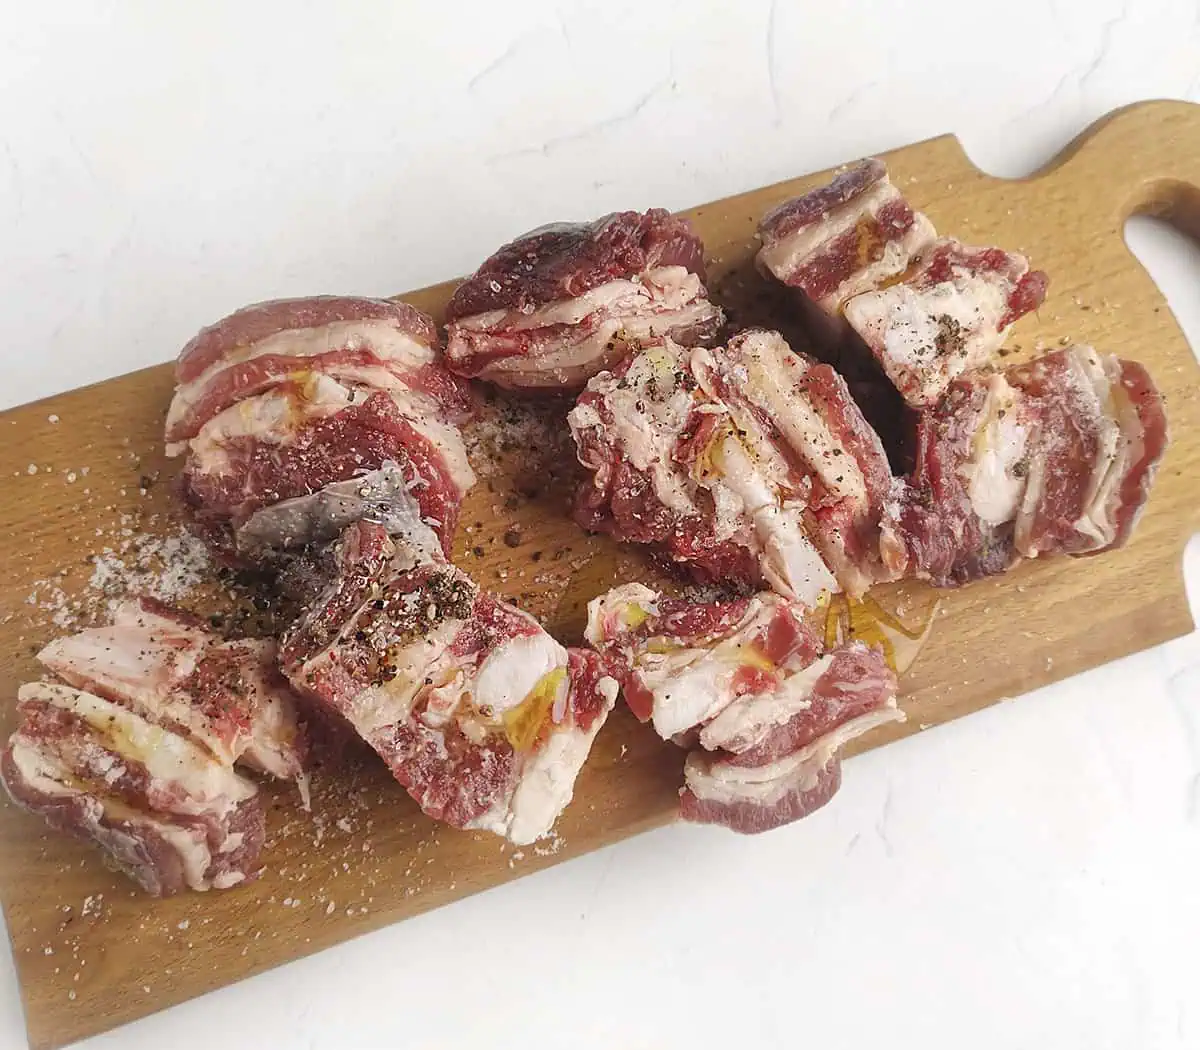 Raw beef short ribs seasoned with salt, pepper and olive oil on a wooden cutting board.